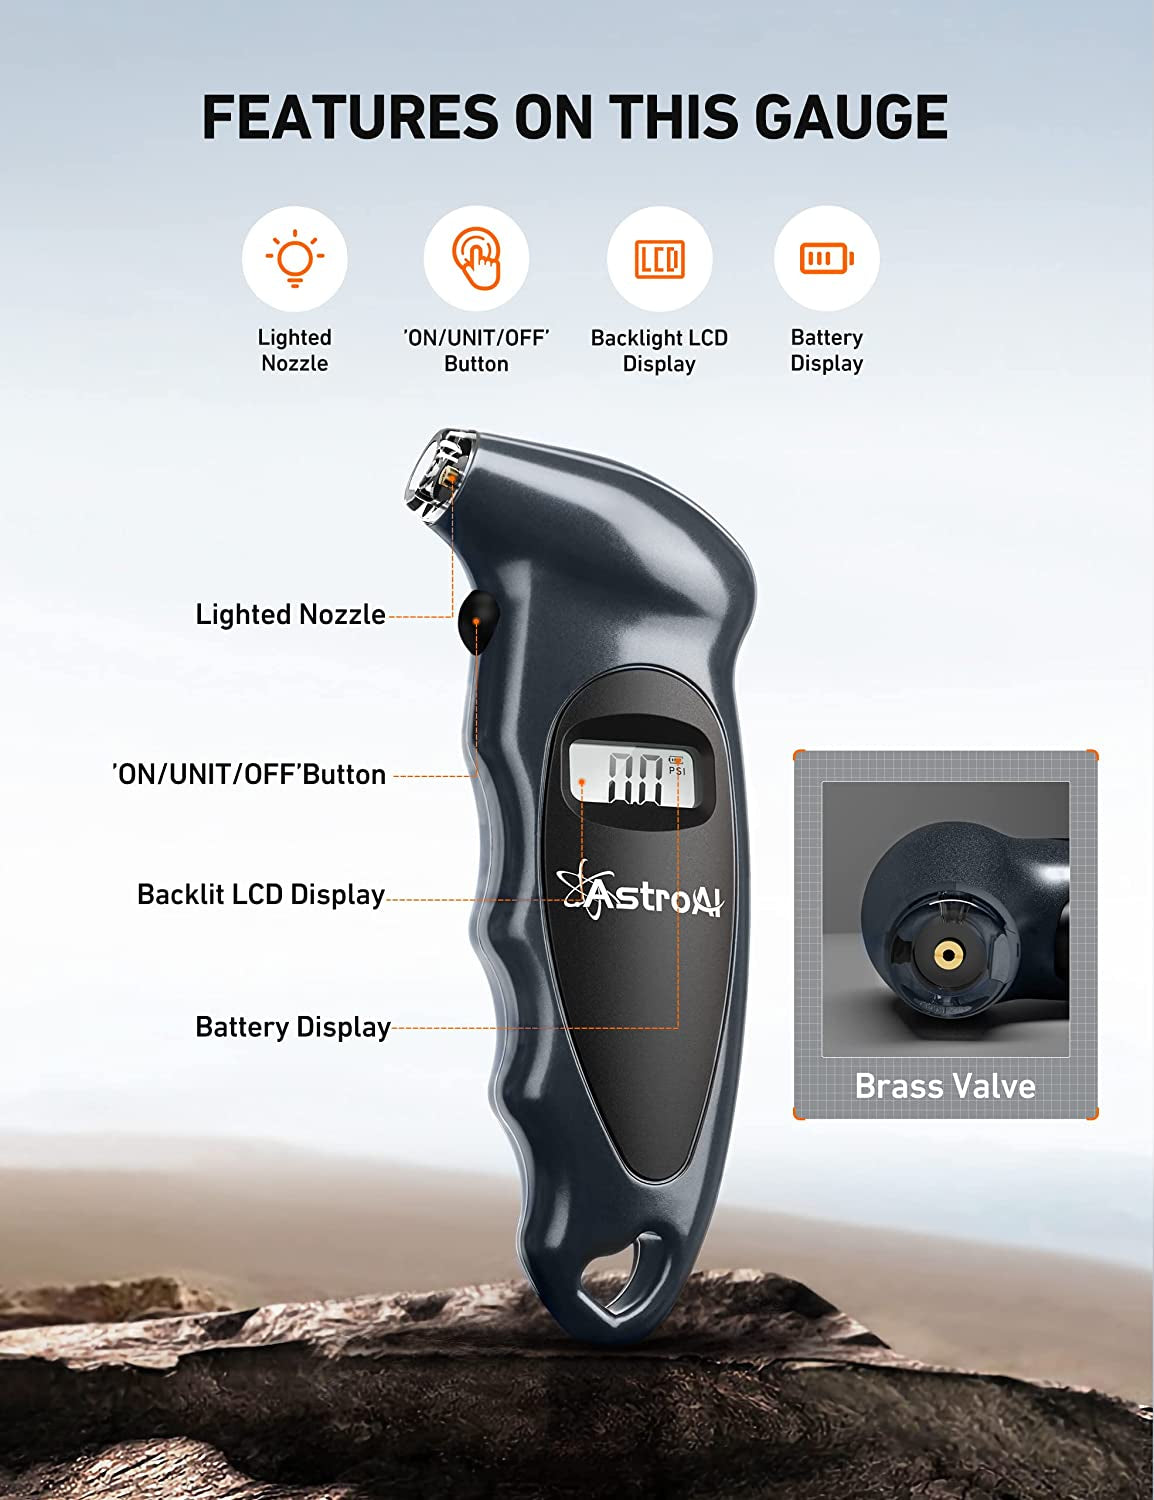 High-Quality Digital Tire Pressure Gauge with Replaceable AAA Battery, 150 PSI 4 Settings, Backlit LCD, Non-Slip Grip, Suitable for Car, Truck, Bicycle & More